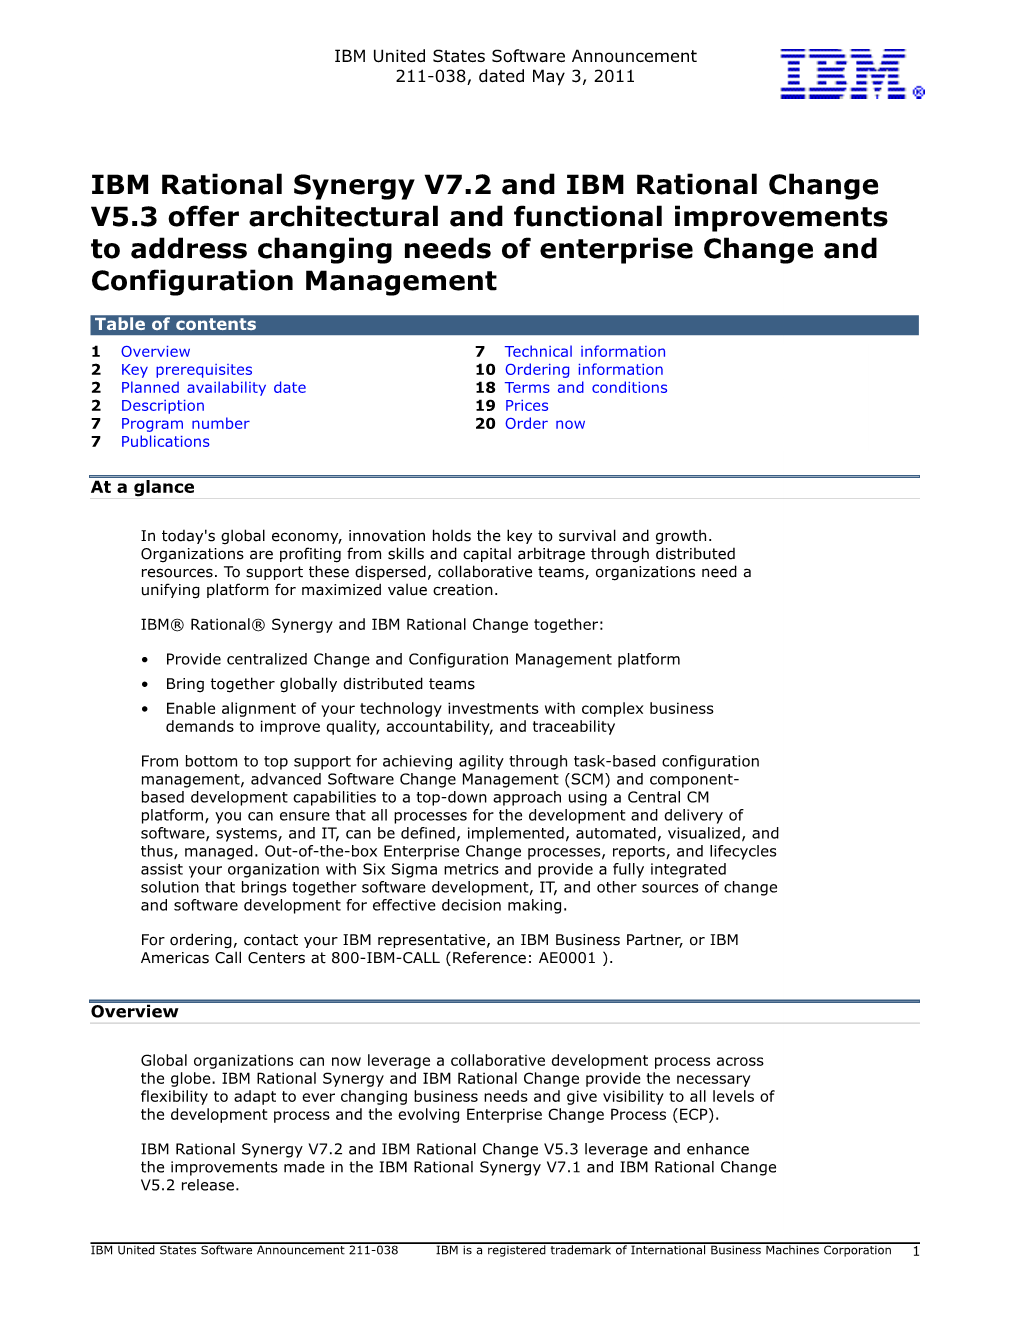 IBM Rational Synergy V7.2 and IBM Rational Change V5.3 Offer Architectural and Functional Improvements to Address Changing Needs